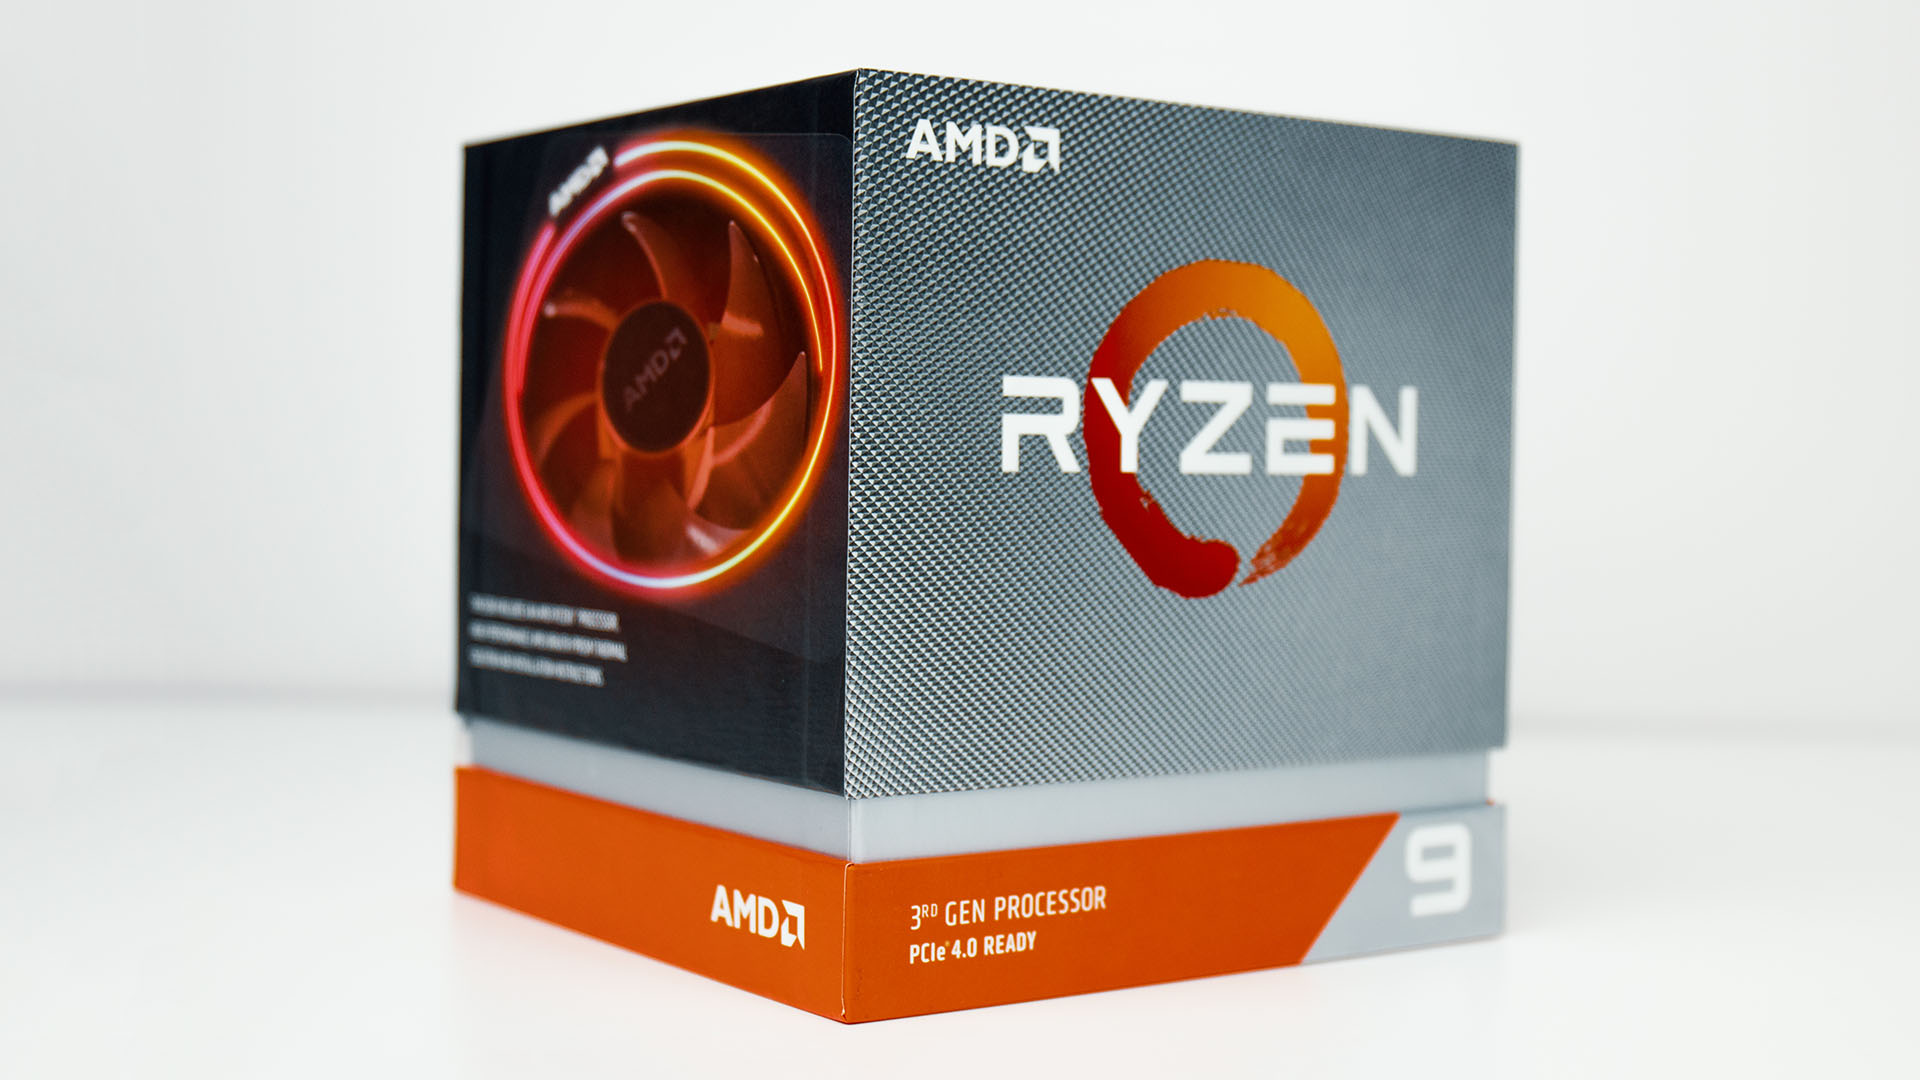 Less than 6% of AMD Ryzen 9 3900X CPUs capable of advertised 4.6